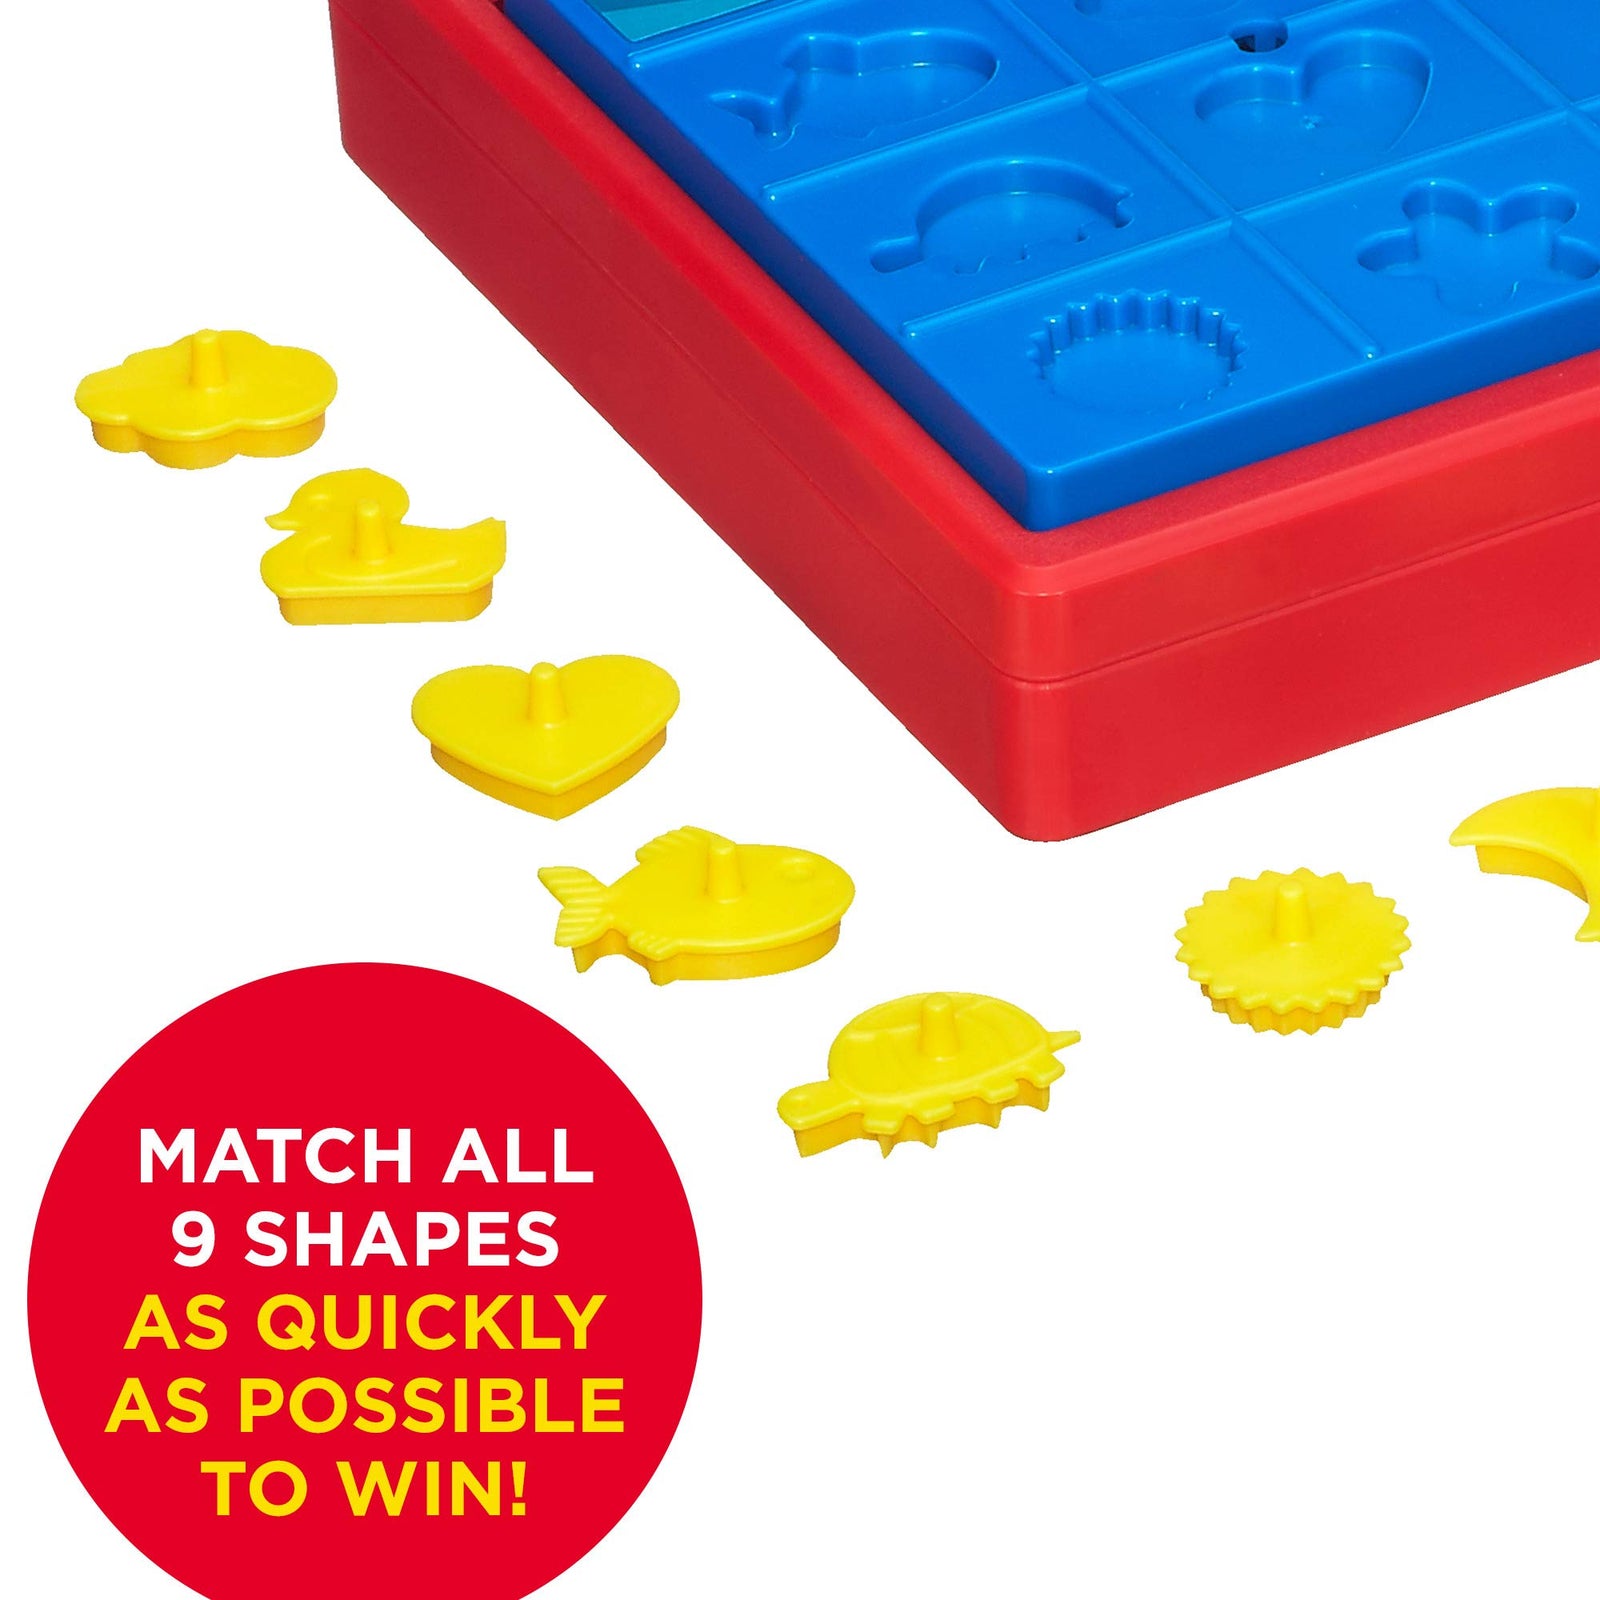 Perfection Game Popping Shapes and Pieces Game for Kids Ages 4 and Up